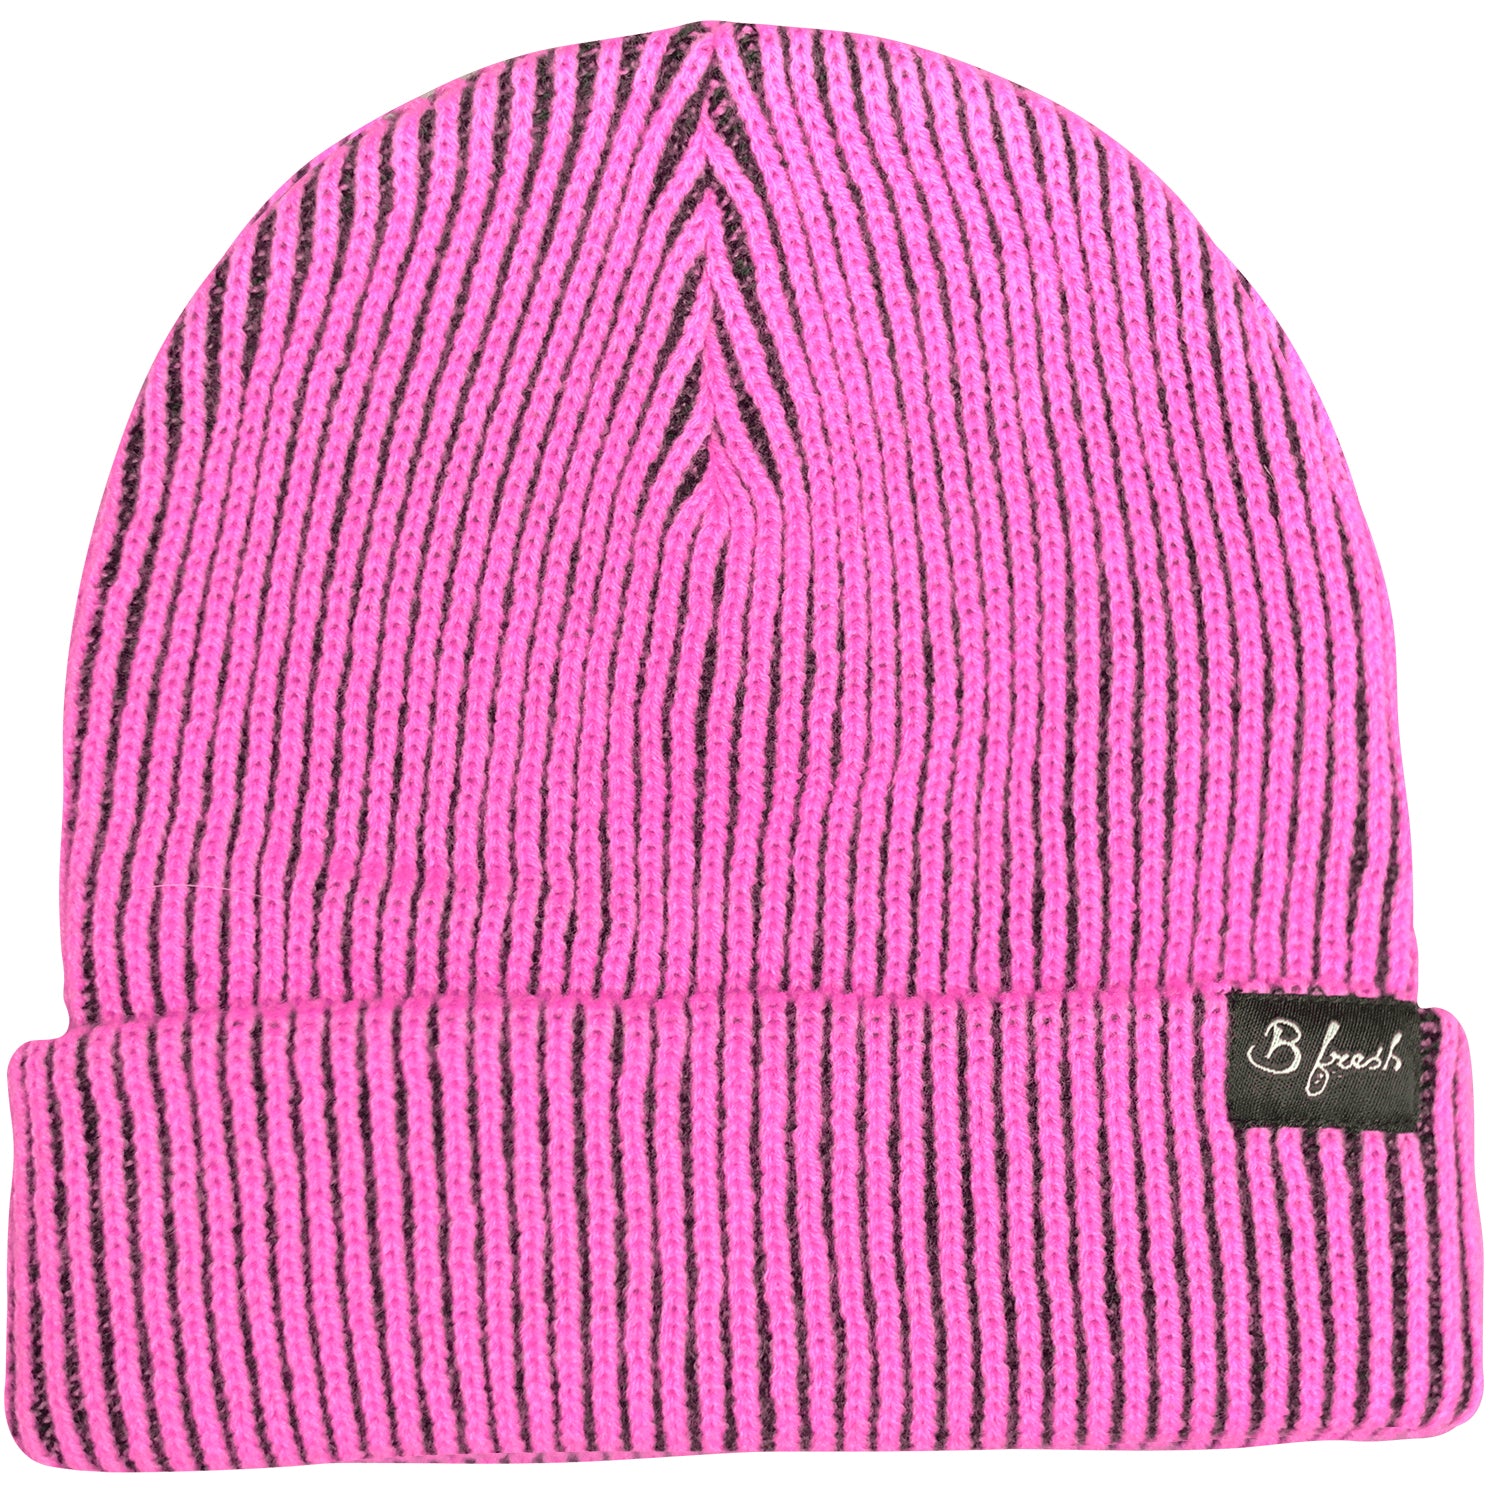 The Mickey Pink Two Toned 80s 90s Retro Stocking Cap Beanie Winter Hat. B Fresh Gear.